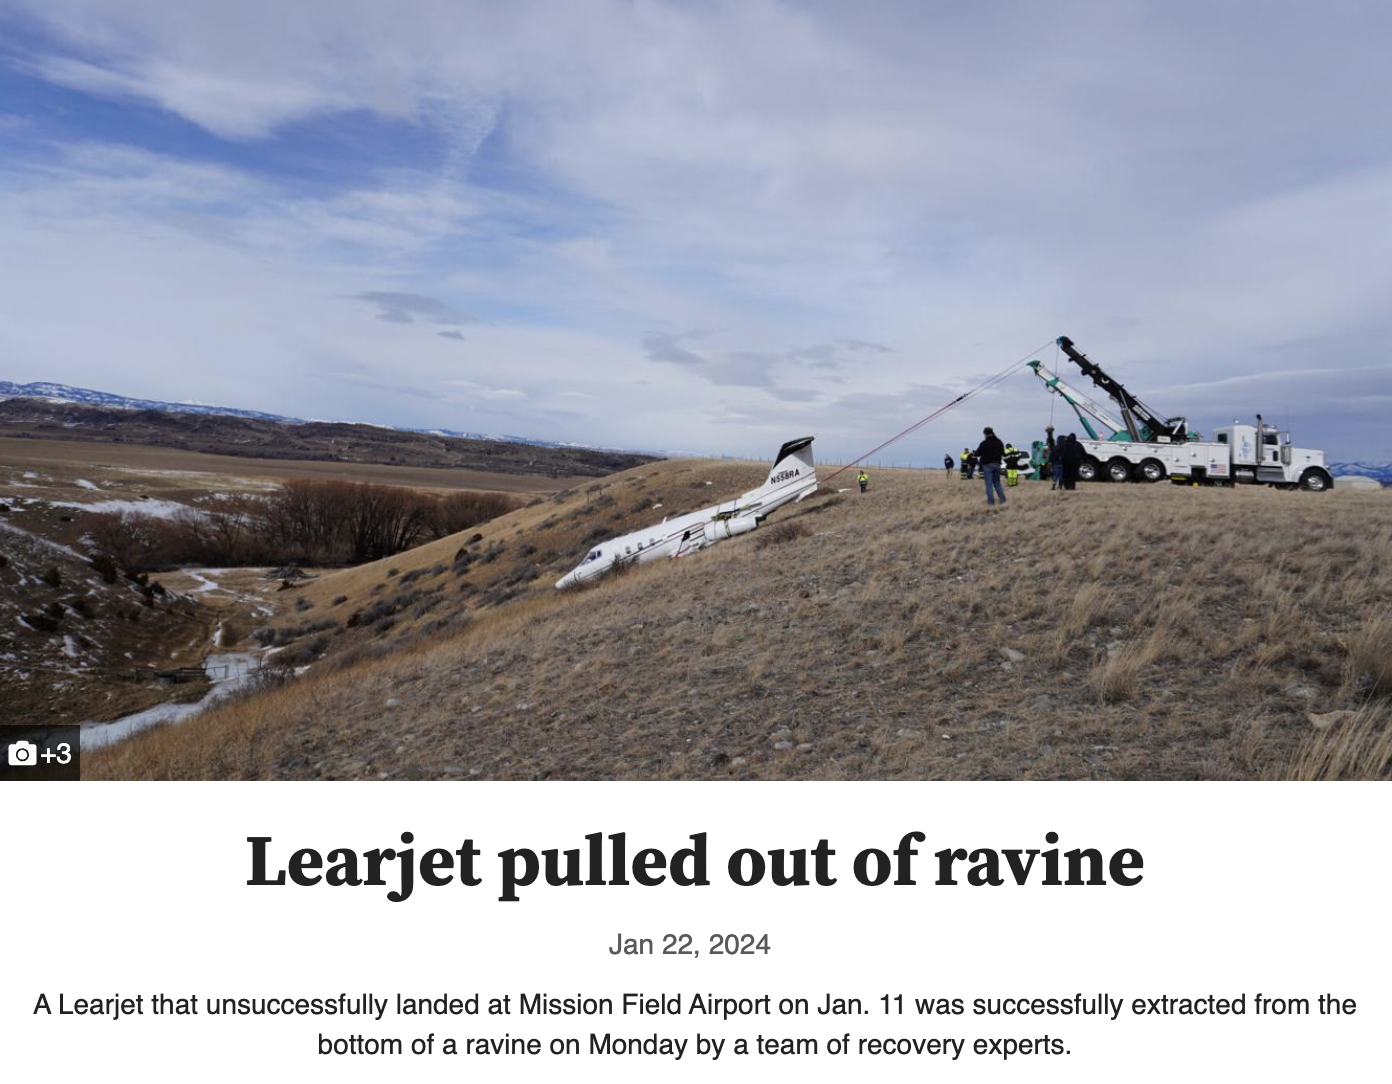 sky - 03 Learjet pulled out of ravine A Learjet that unsuccessfully landed at Mission Field Airport on Jan. 11 was successfully extracted from the bottom of a ravine on Monday by a team of recovery experts.